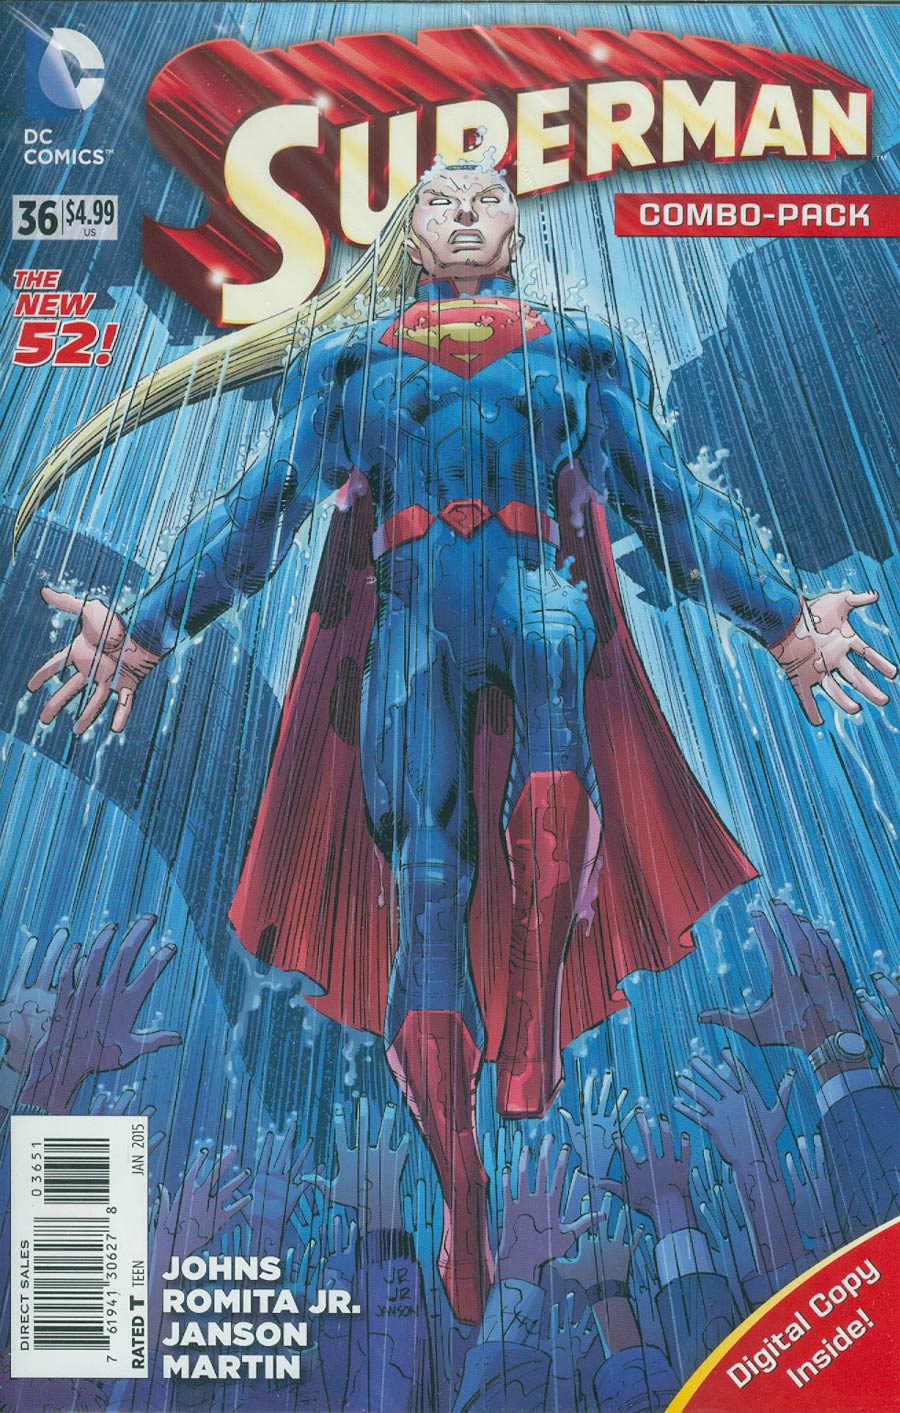 Superman Vol 4 #36 Cover D Combo Pack Without Polybag